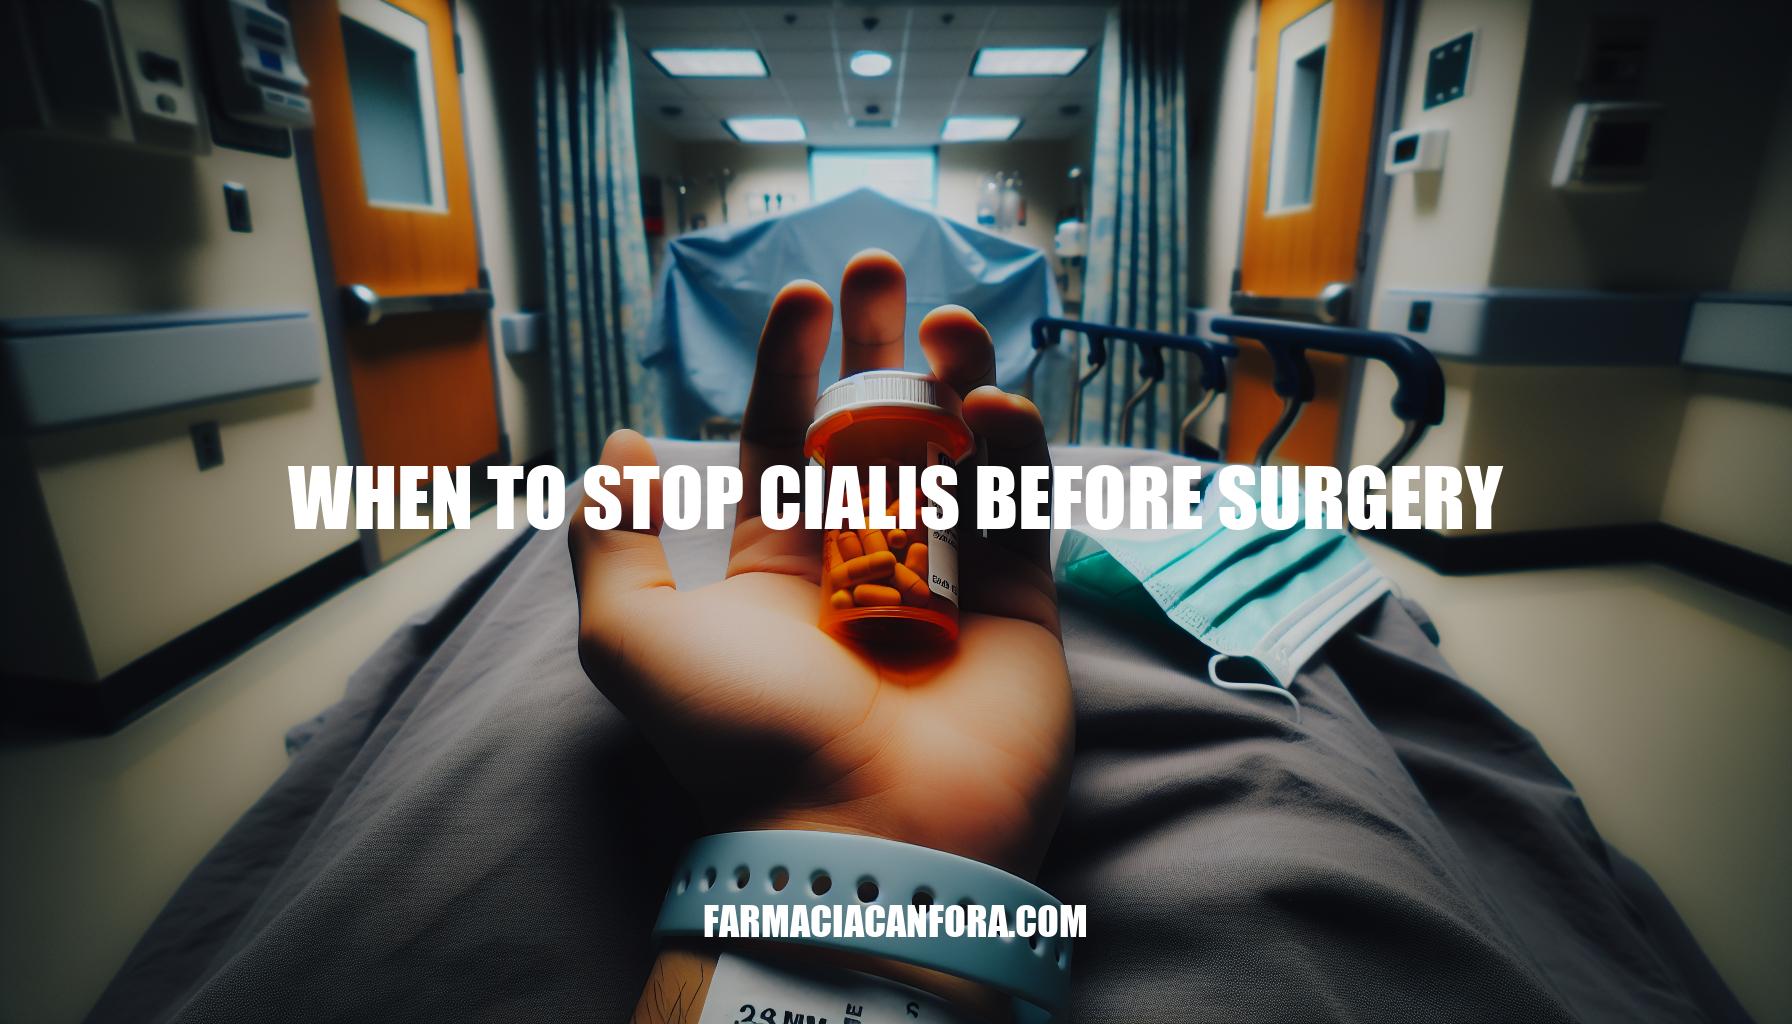 When to Stop Cialis Before Surgery